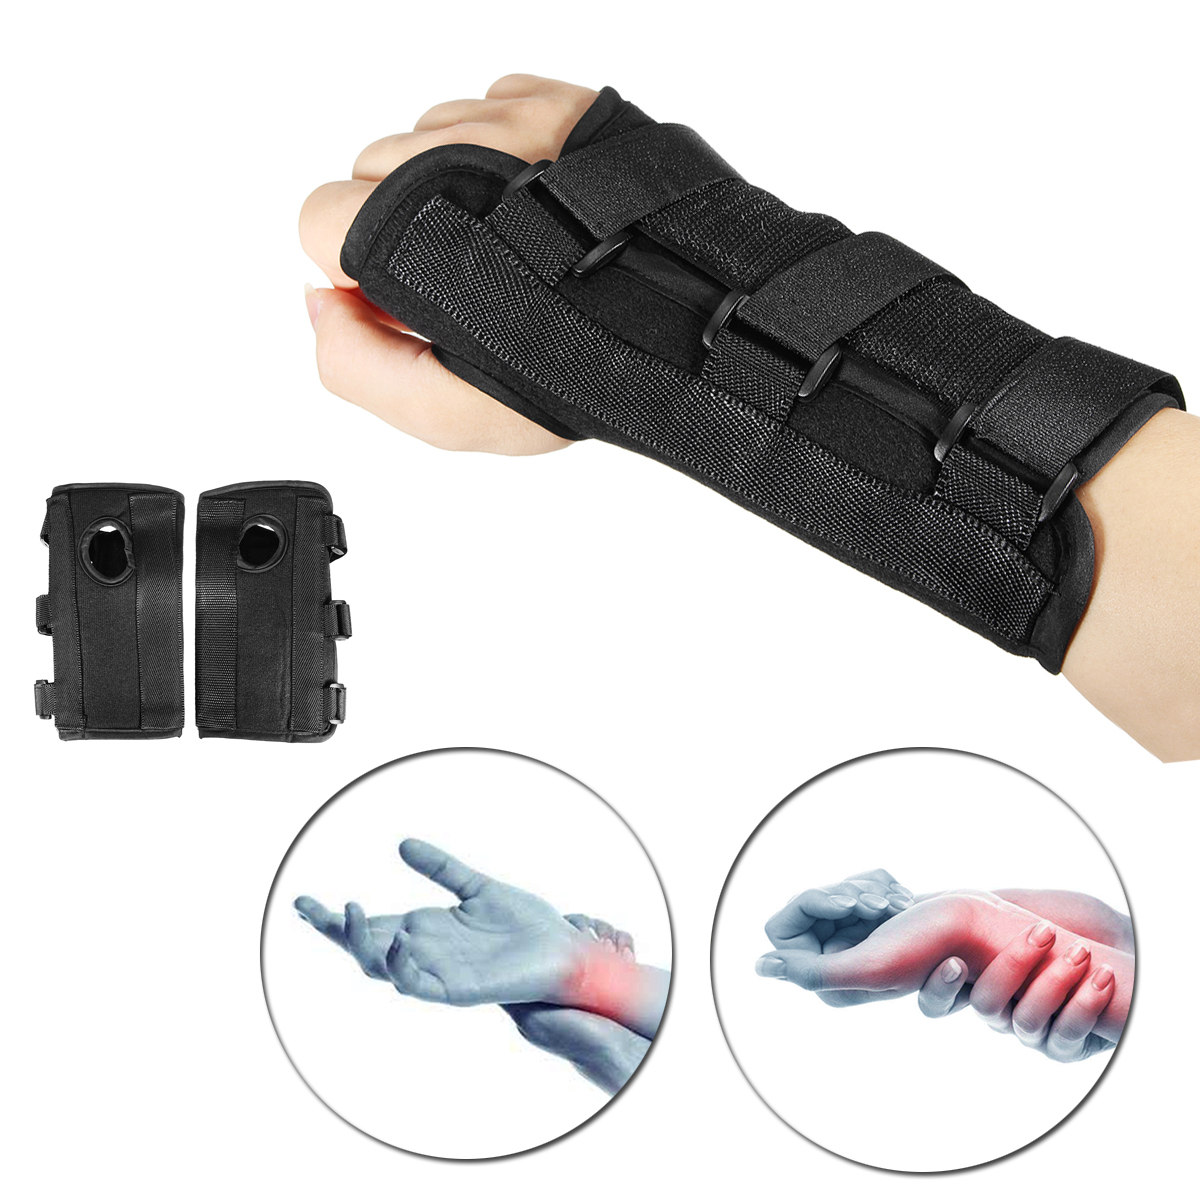 1Pair-Right-Left-Hands-Breathable-Night-Wrist-Brace-Sleep-Support-Carpal-Tunnel-Comfort-Composite-Fa-1212318-4